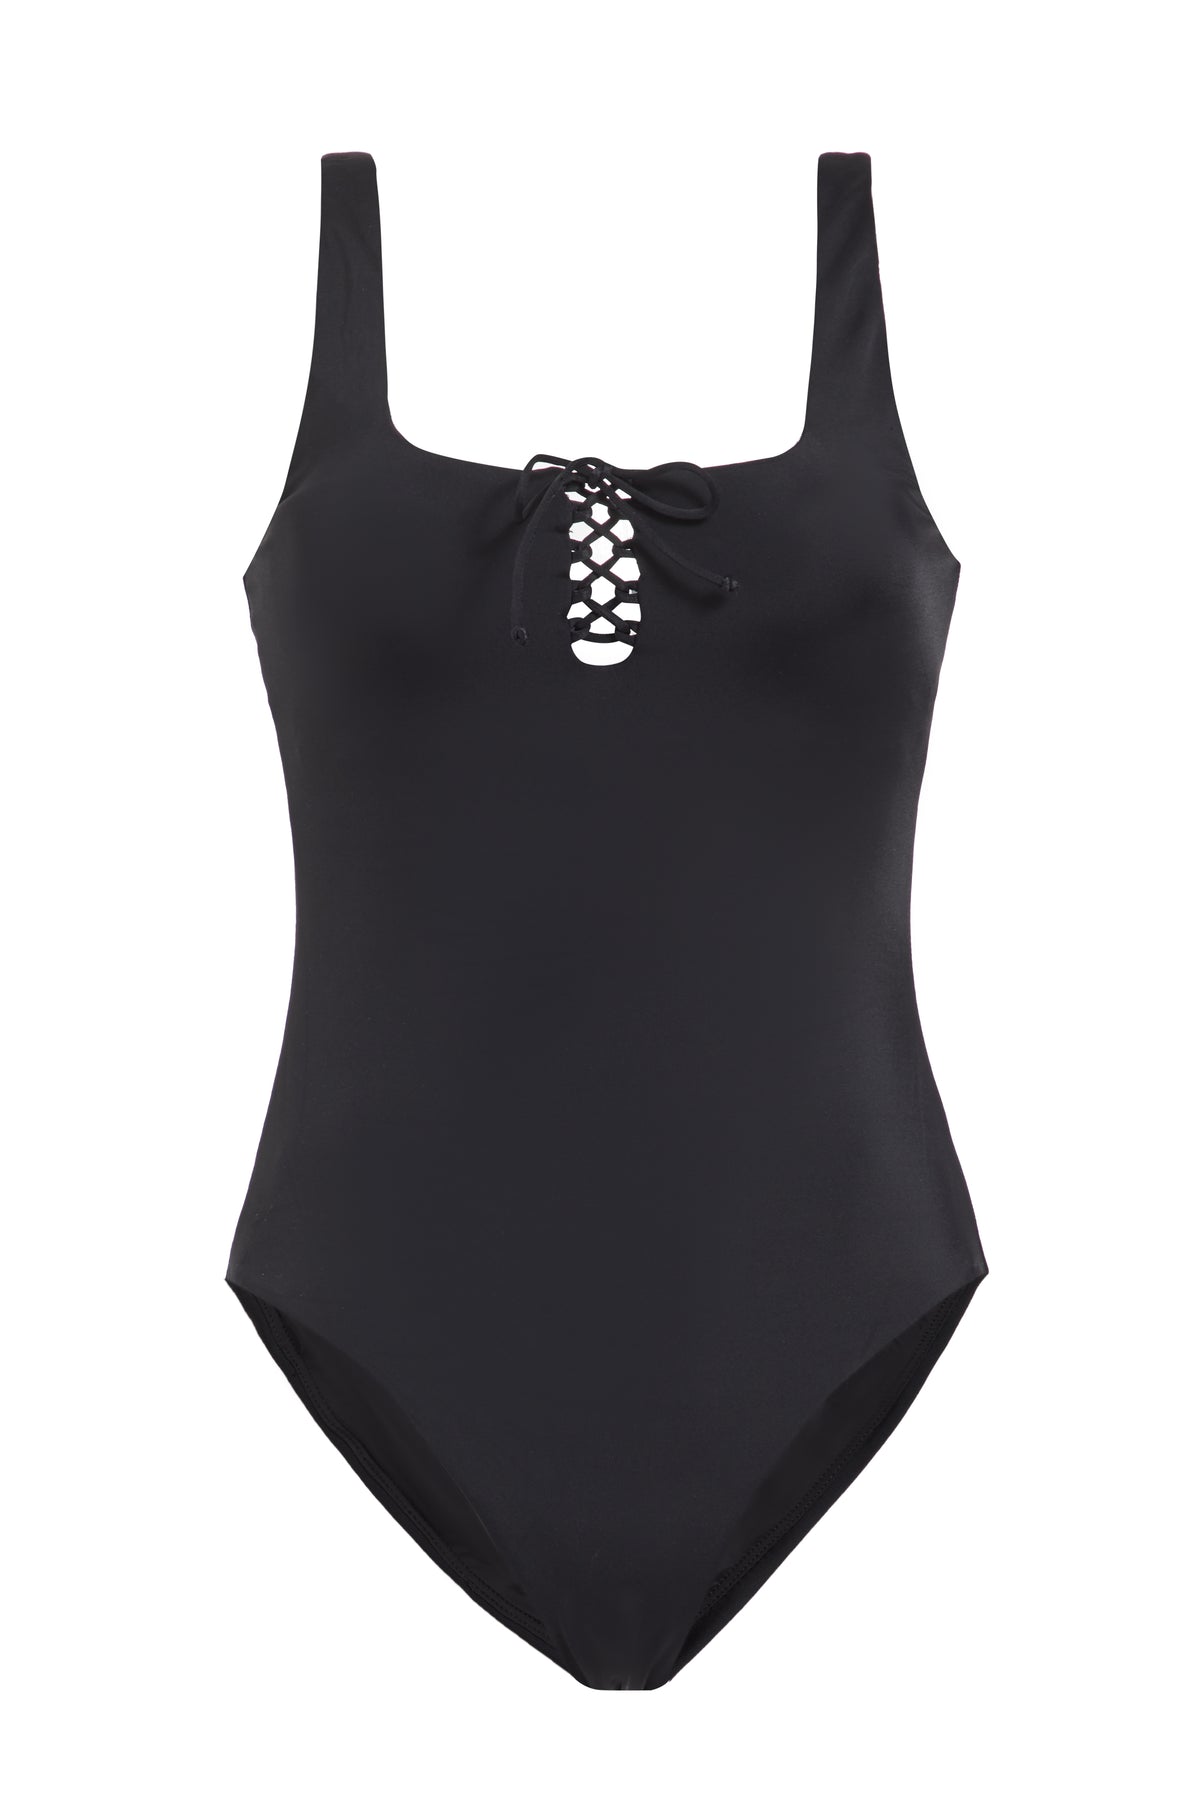 The Macao One Piece in Black